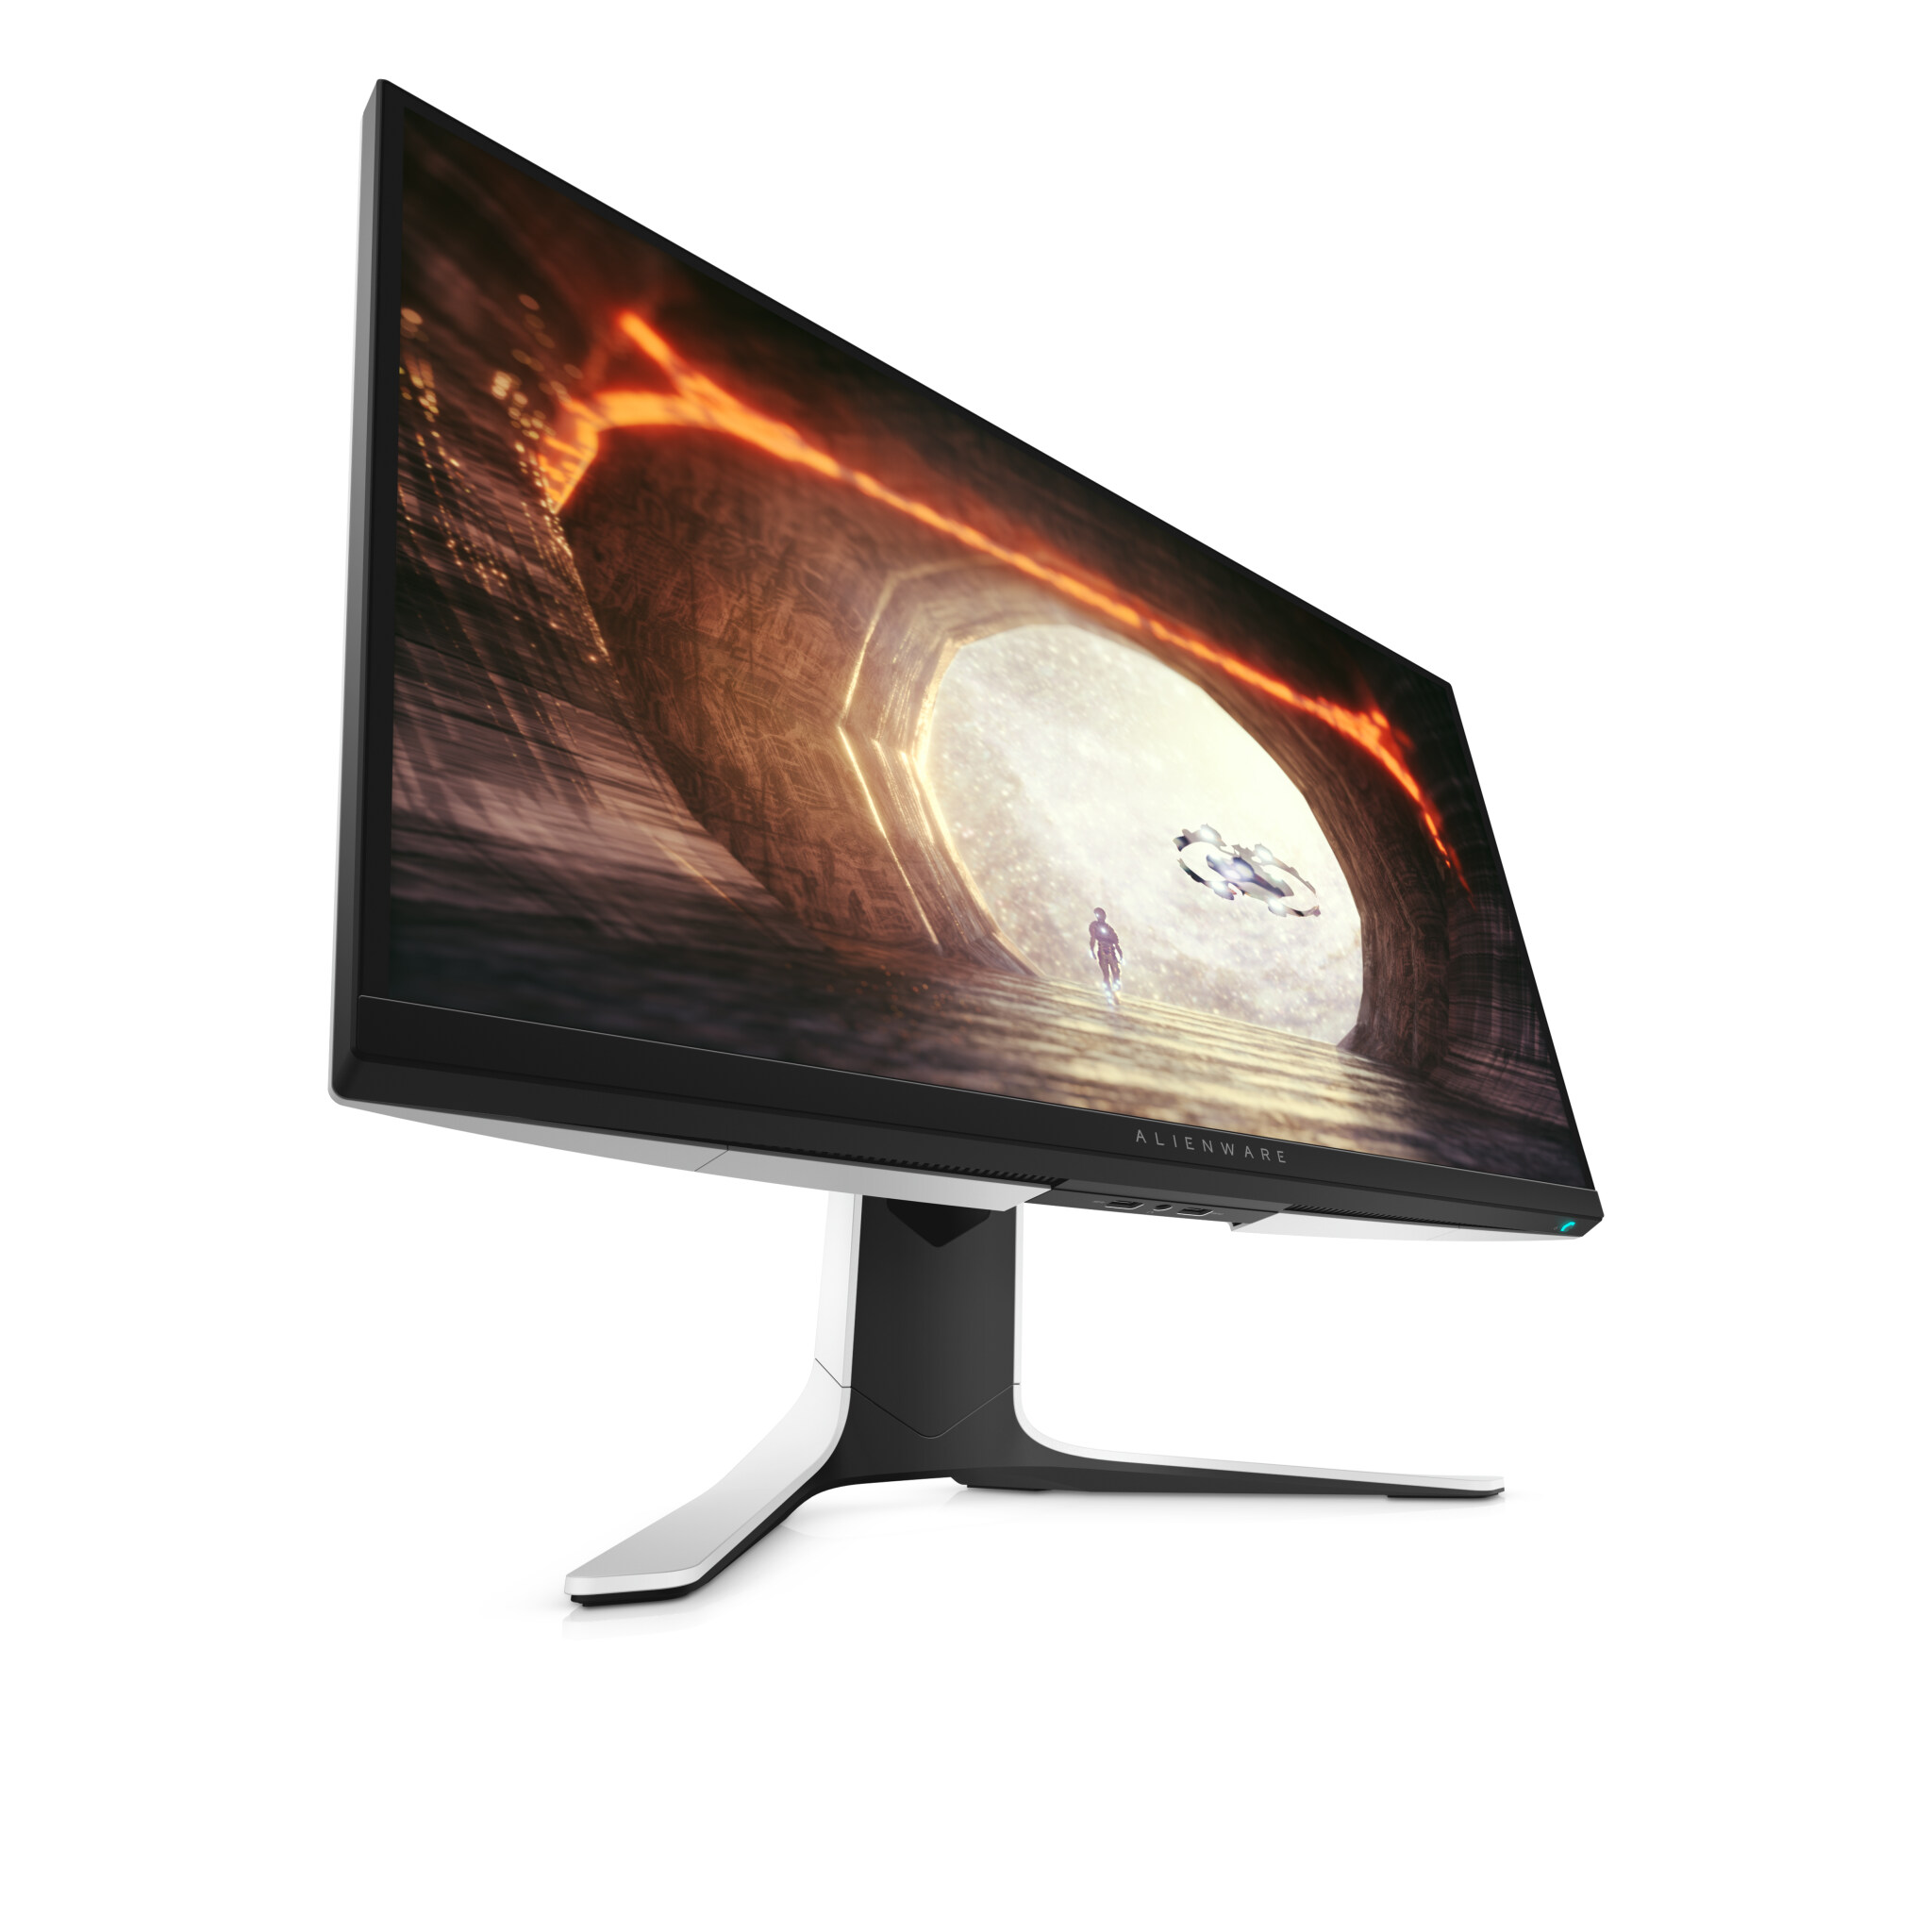 merger boxing Must Alienware 240hz Monitor 27 inch: AW2720HF | Dell USA